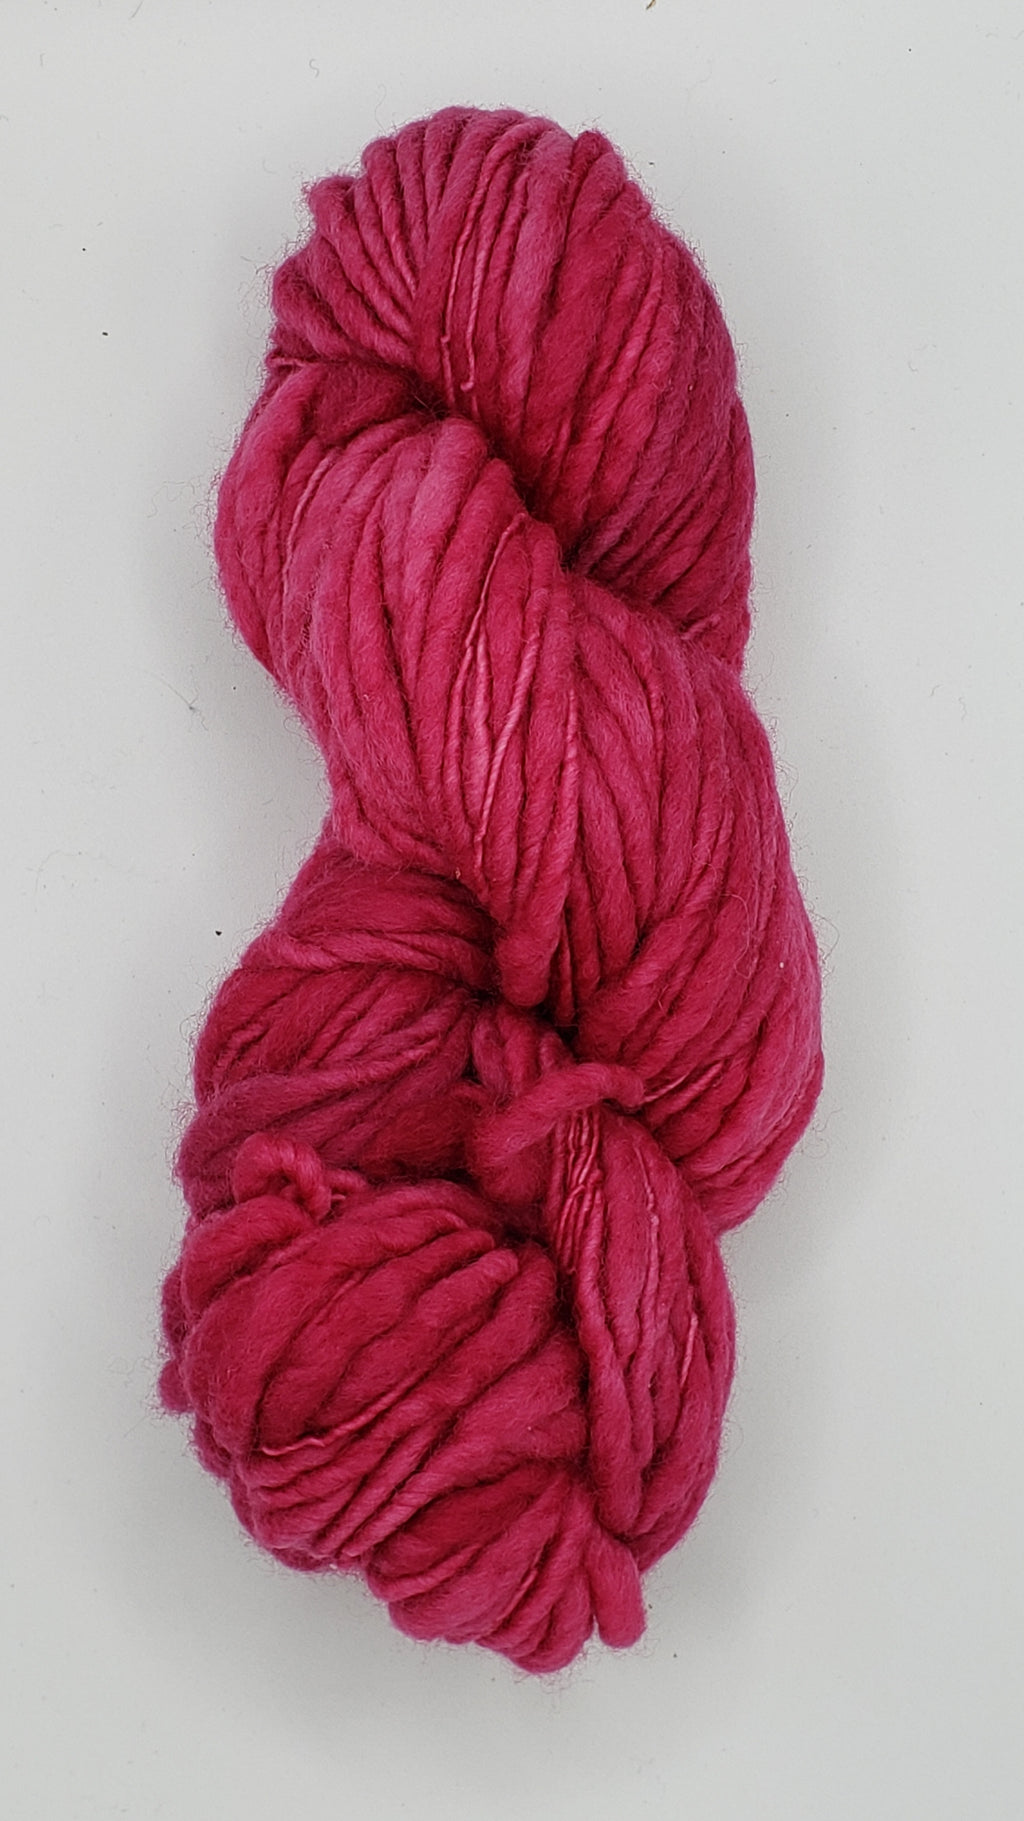 Slubby - RASPBERRY CORDIAL -  Merino/Blue Face Leicester - Hand Dyed Textured Yarn Thick and Thin